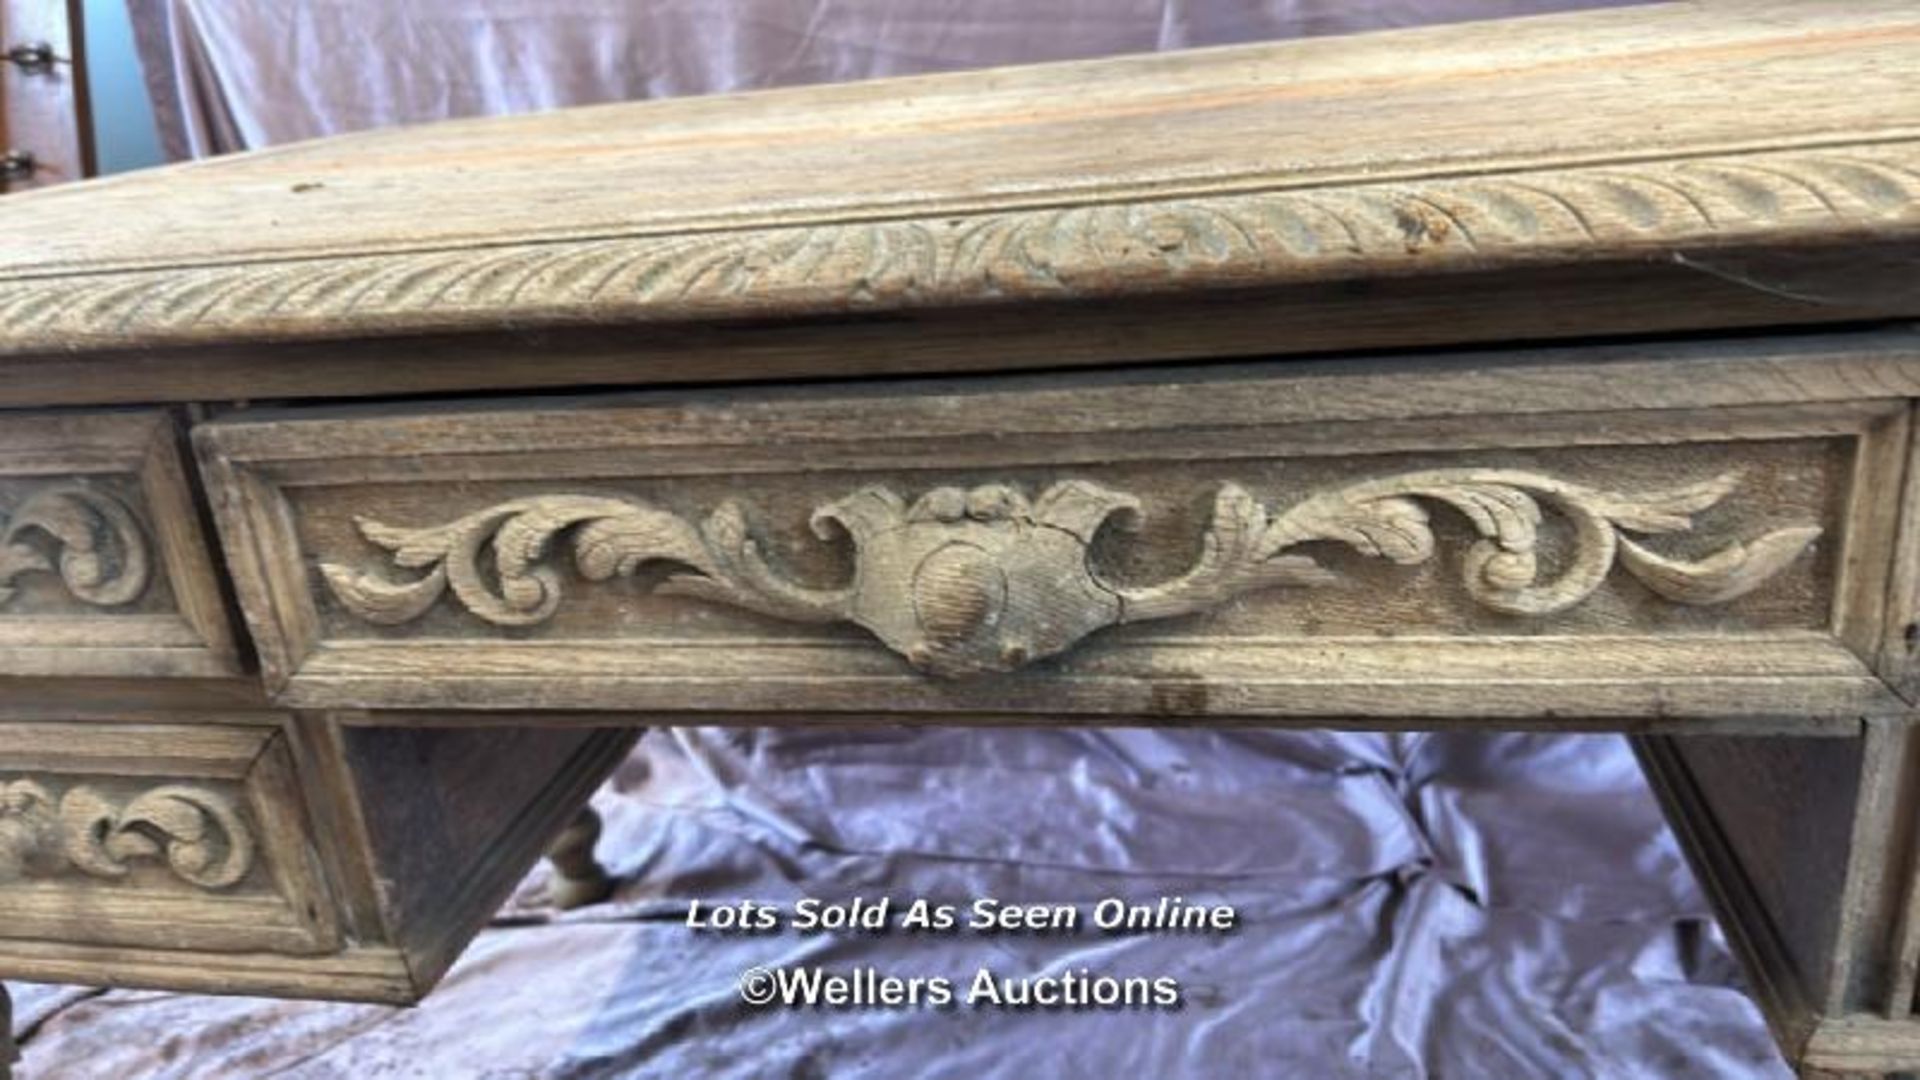 DECORATIVE BLEACHED OAK DESK WITH FOUR DRAWERS ON CARVED LEGS, 130 X 76 X 74.5CM - Image 3 of 7